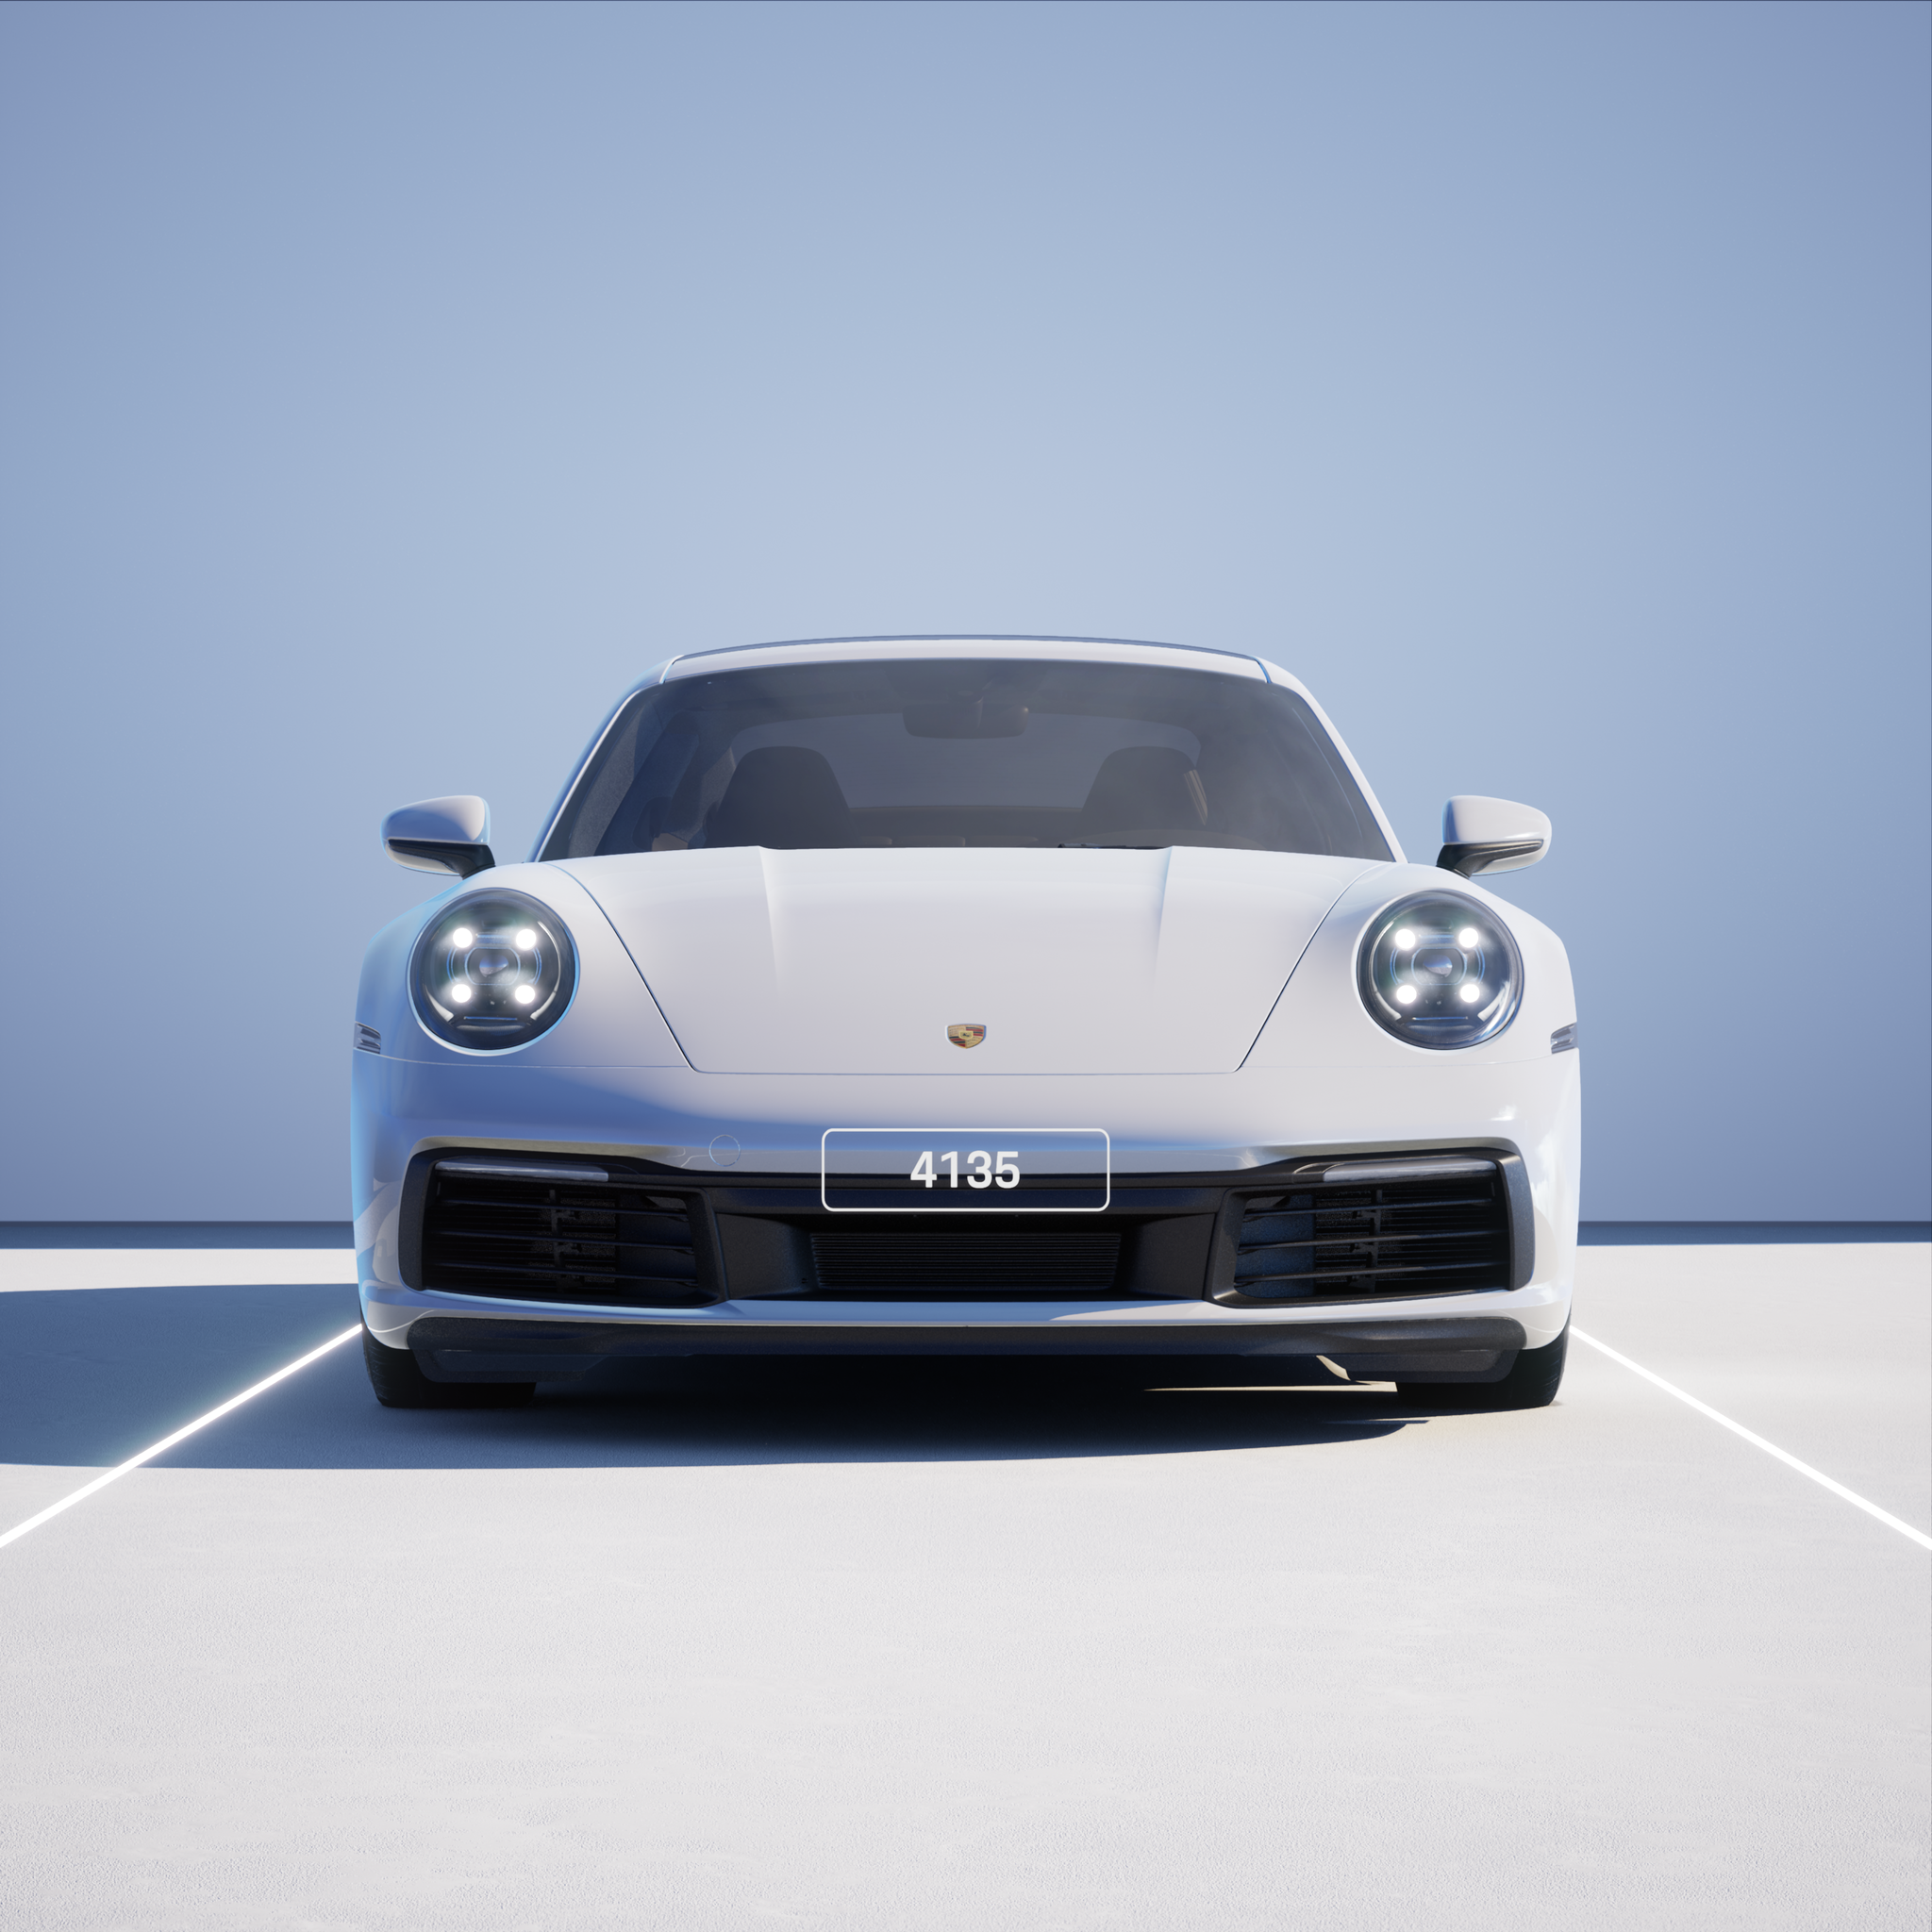 The PORSCHΞ 911 4135 image in phase